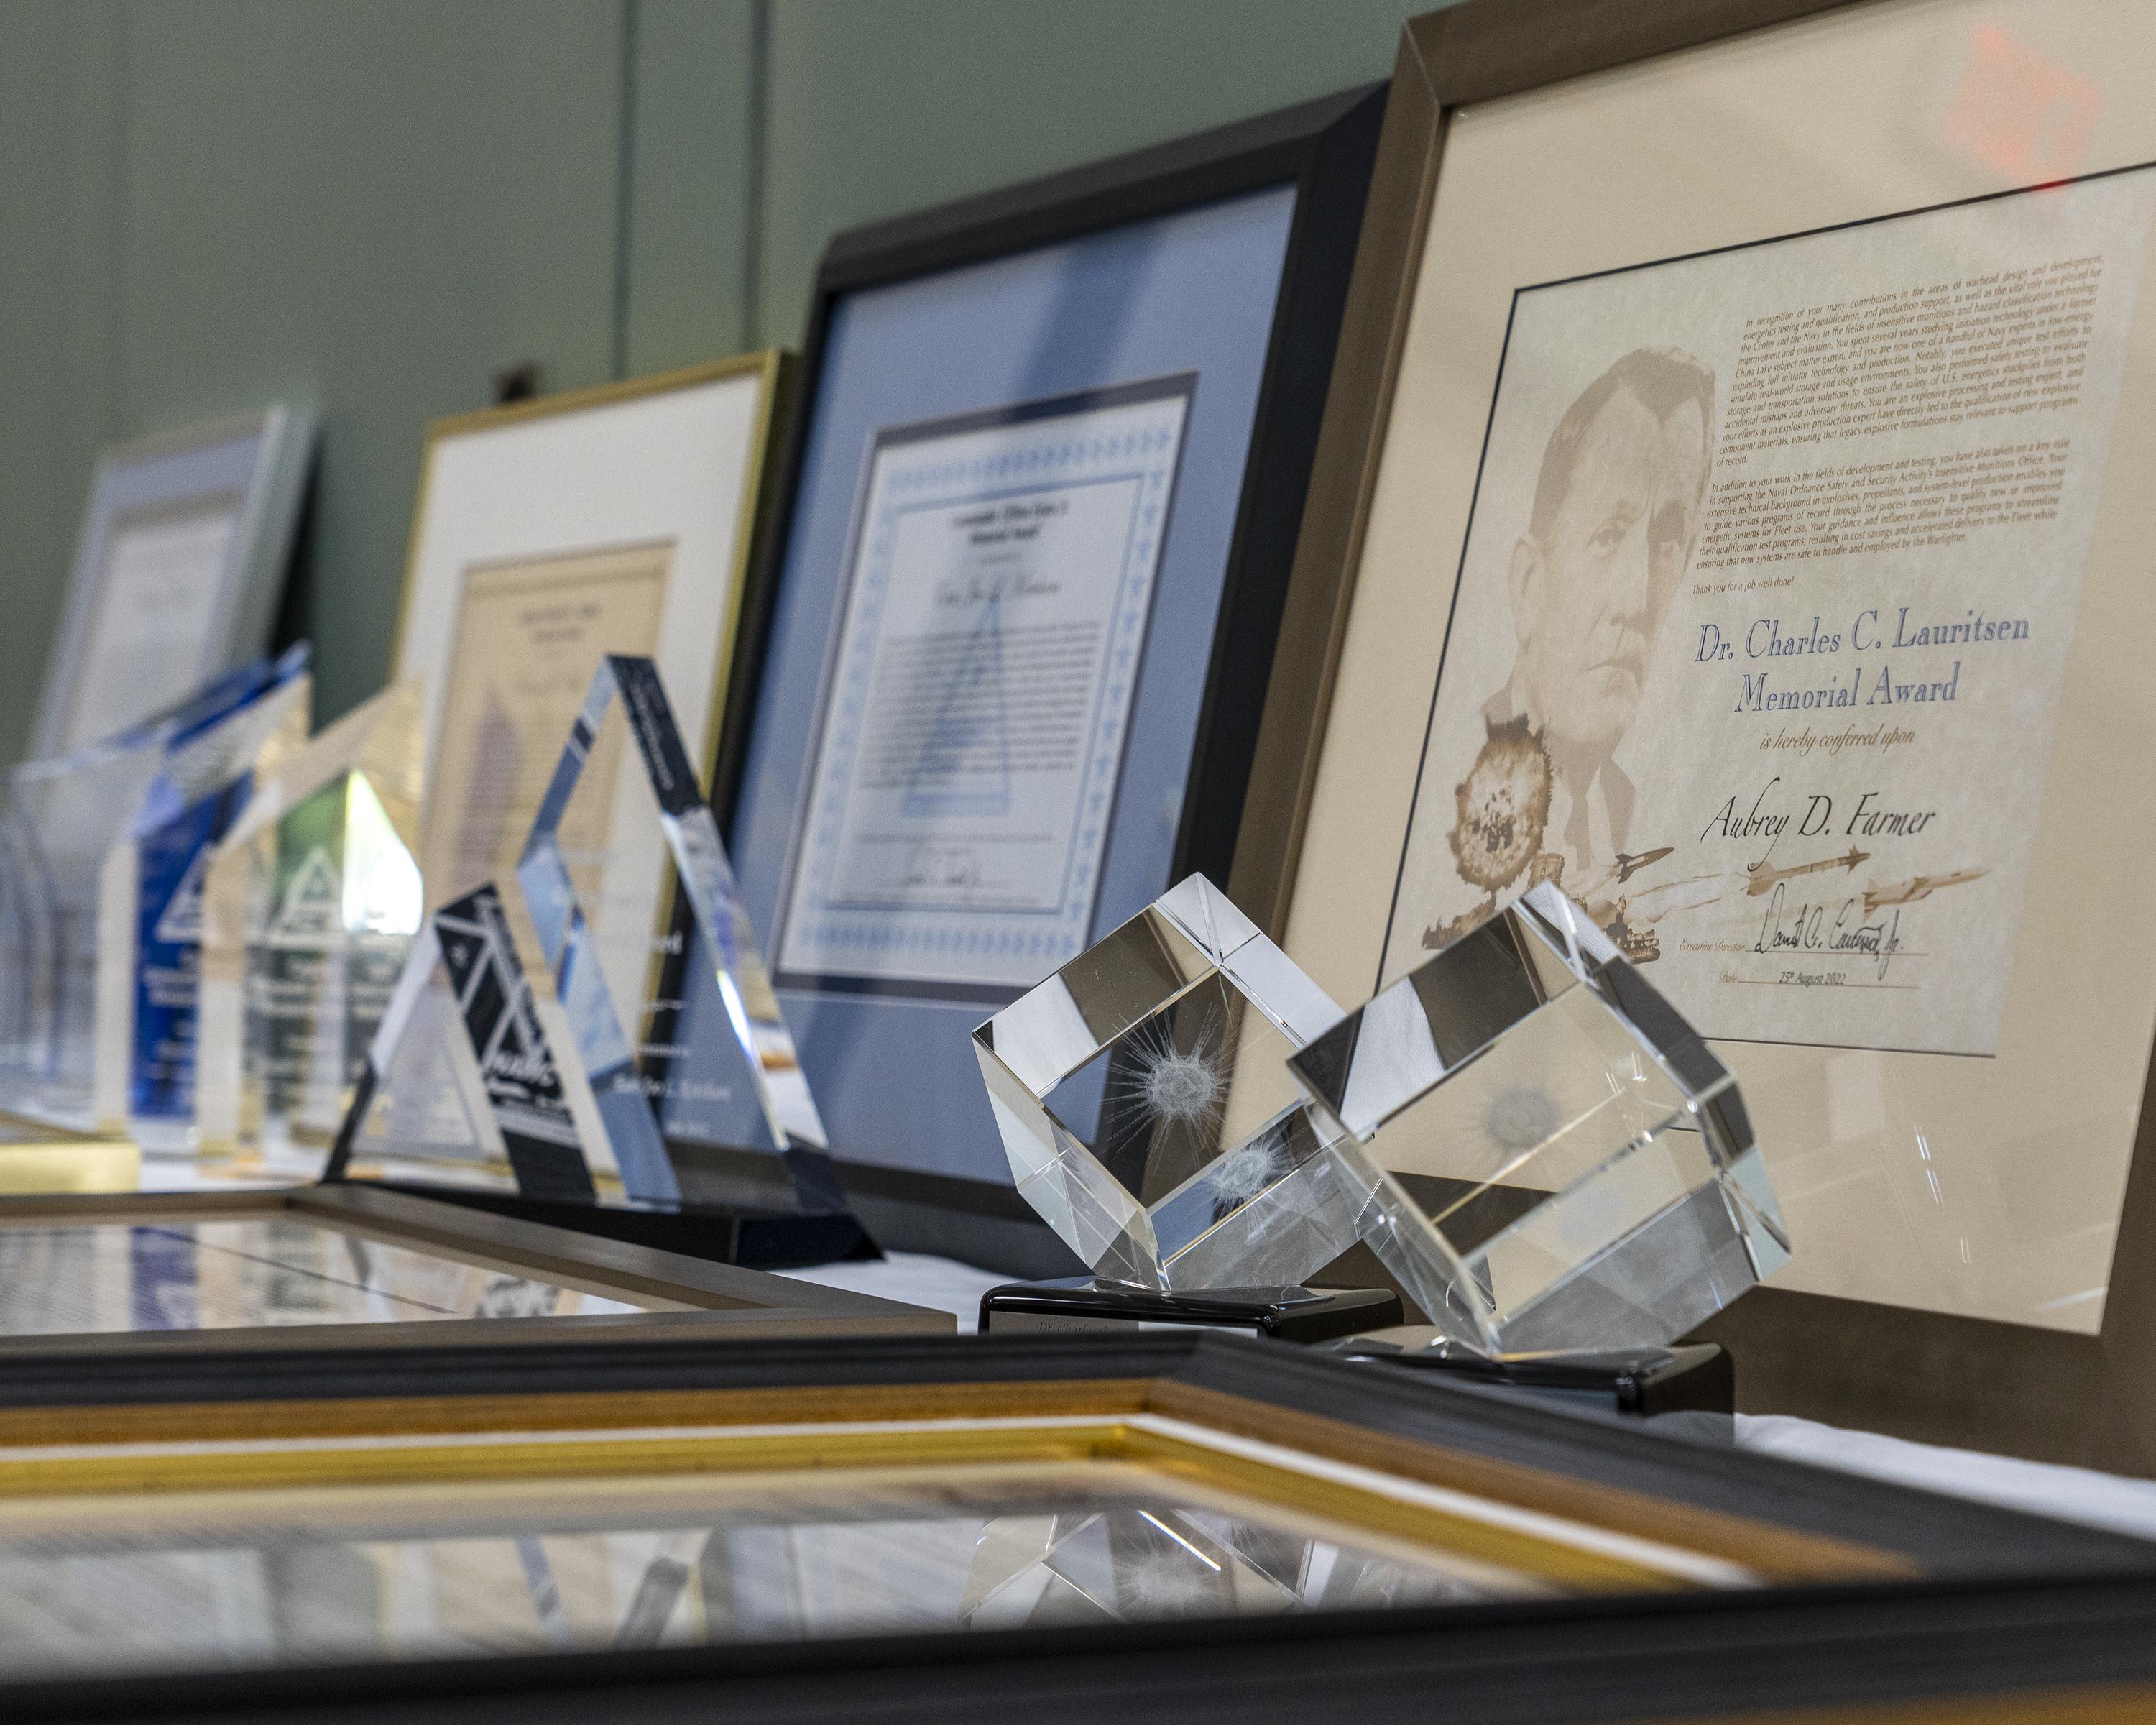 NAWCWD 2020 honorary awards displayed on table